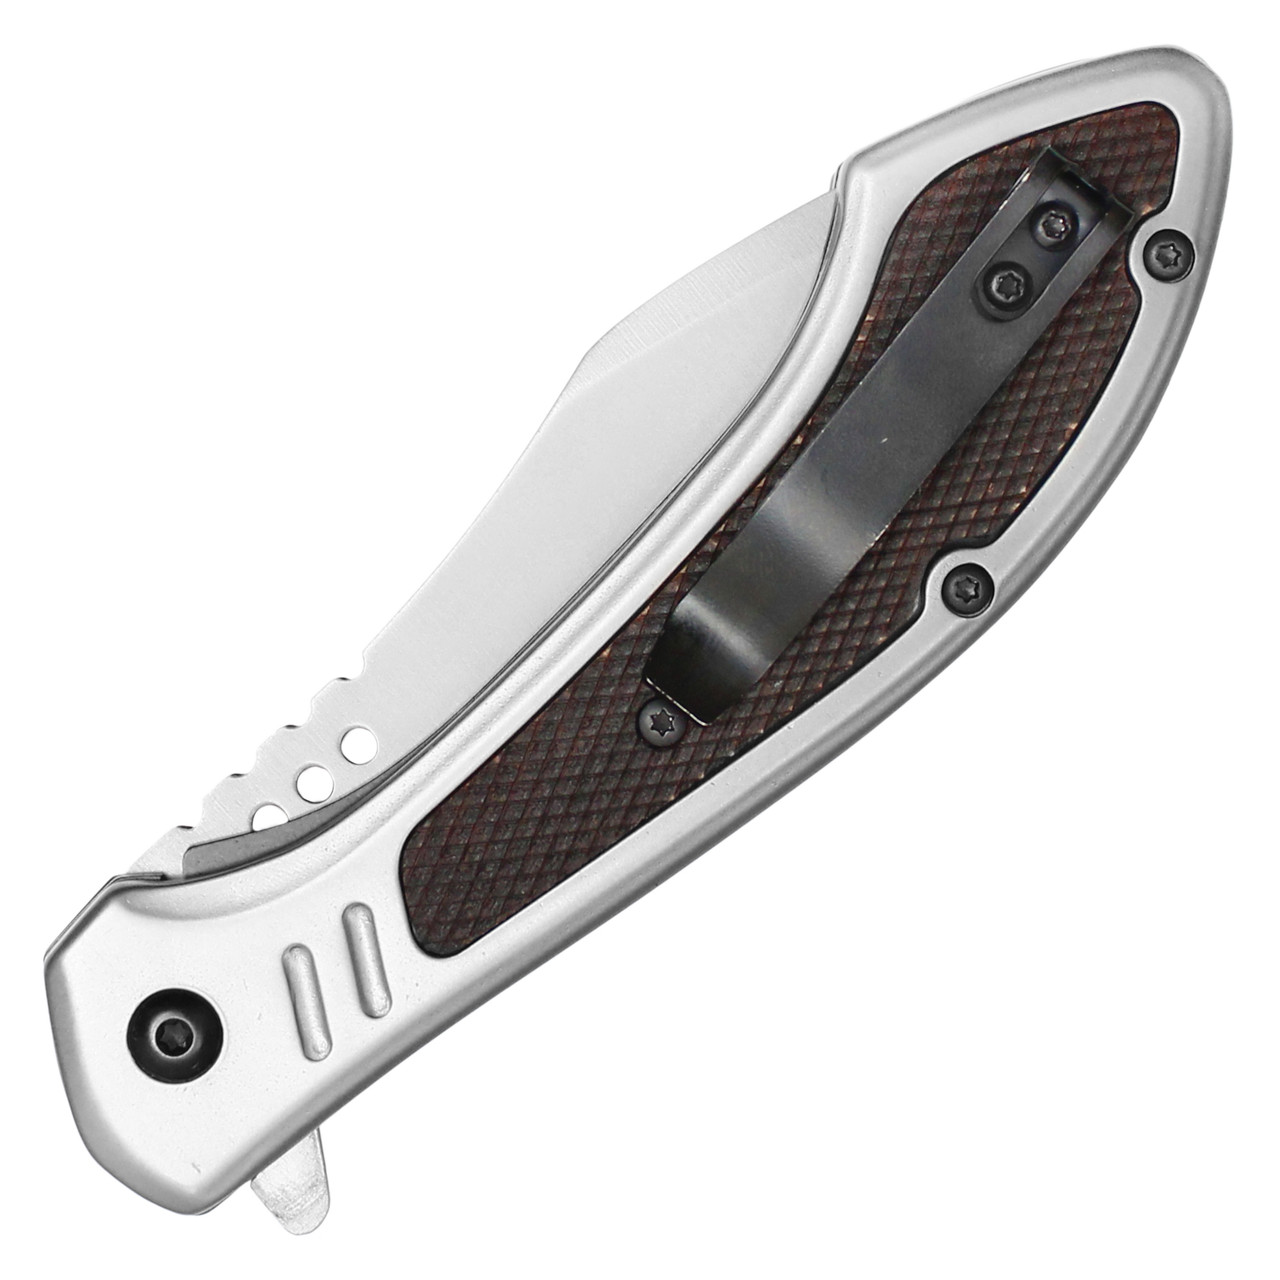 5" Closed Assisted Open Pocket Knife Stainless Steel Handle